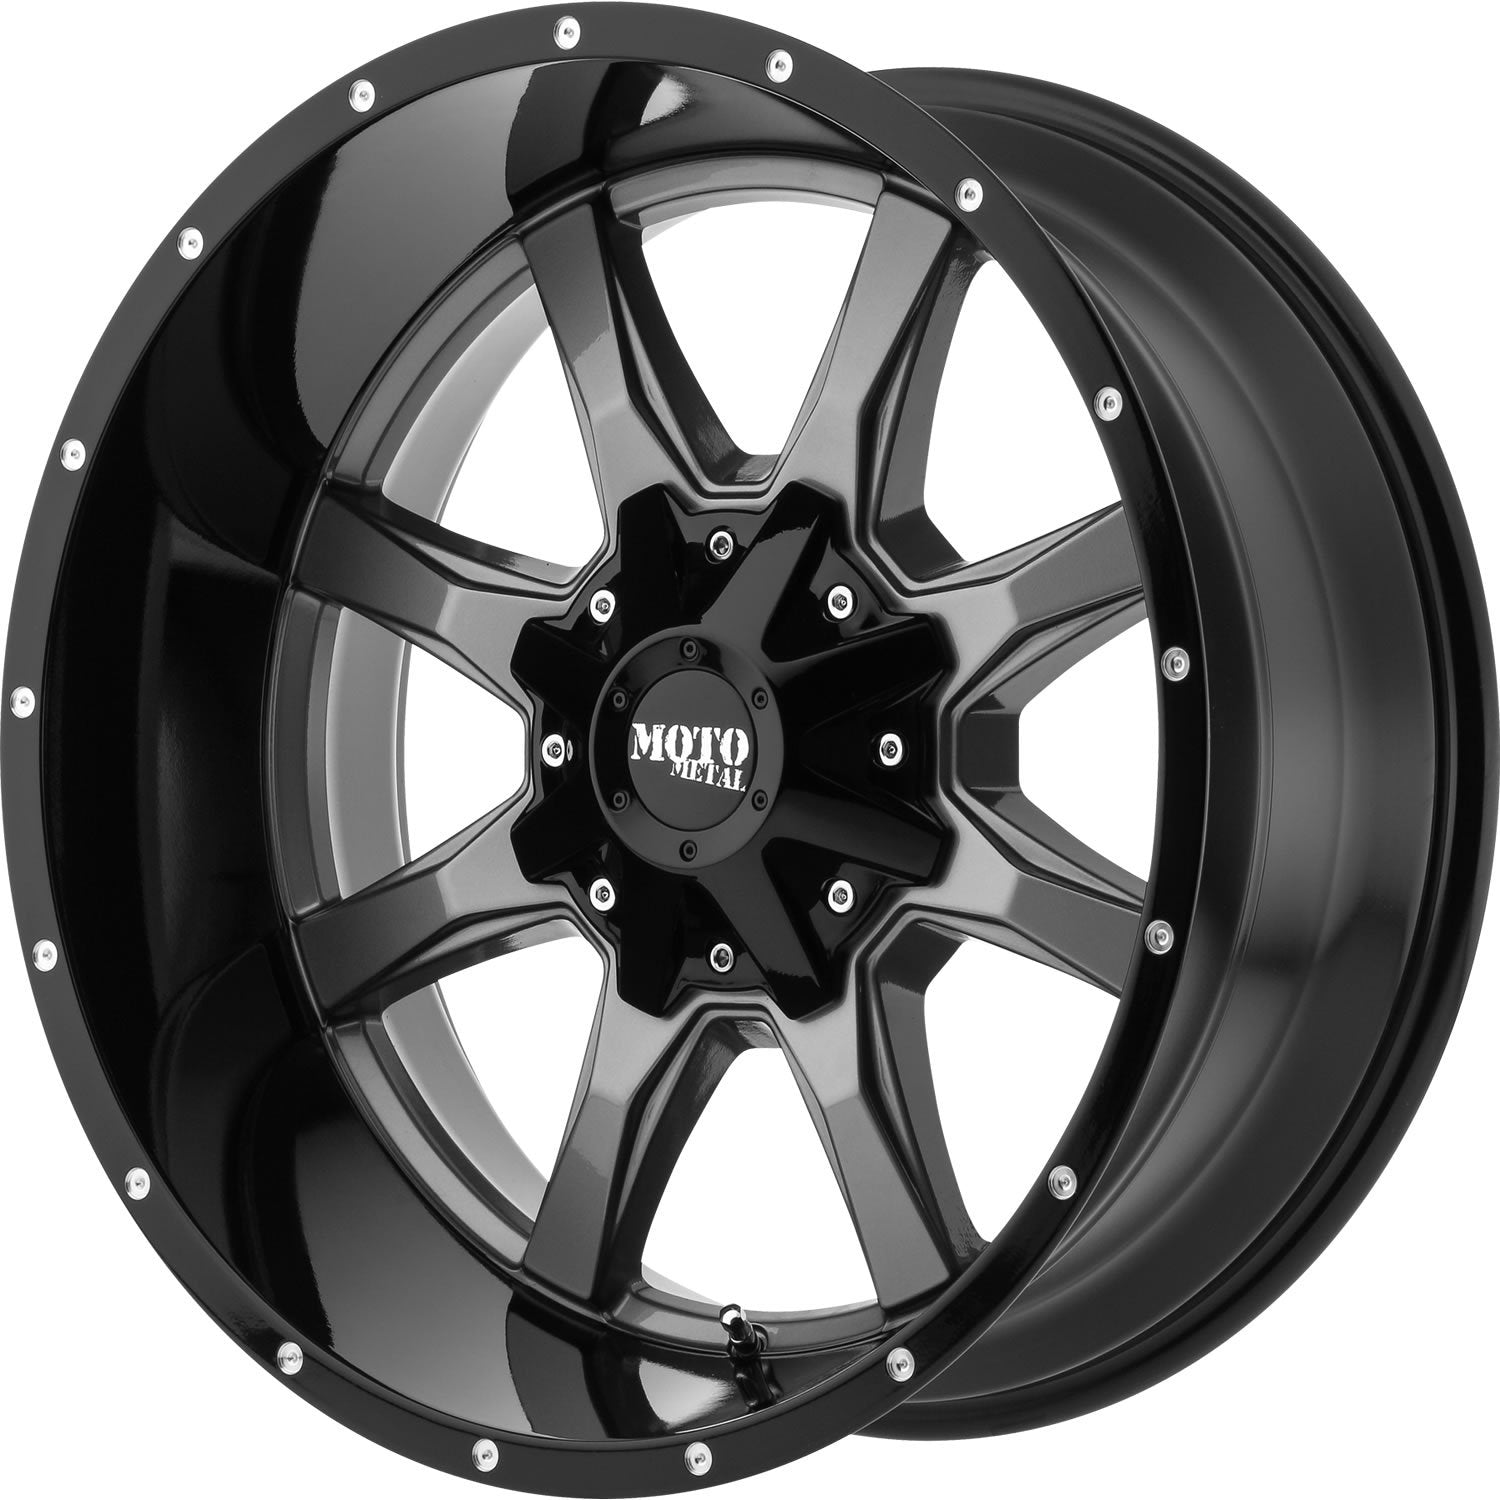 Moto Metal MO970 20x9 0 6x120/6x139.7 (6x5.5) Gray and Black - Tires and Engine Performance